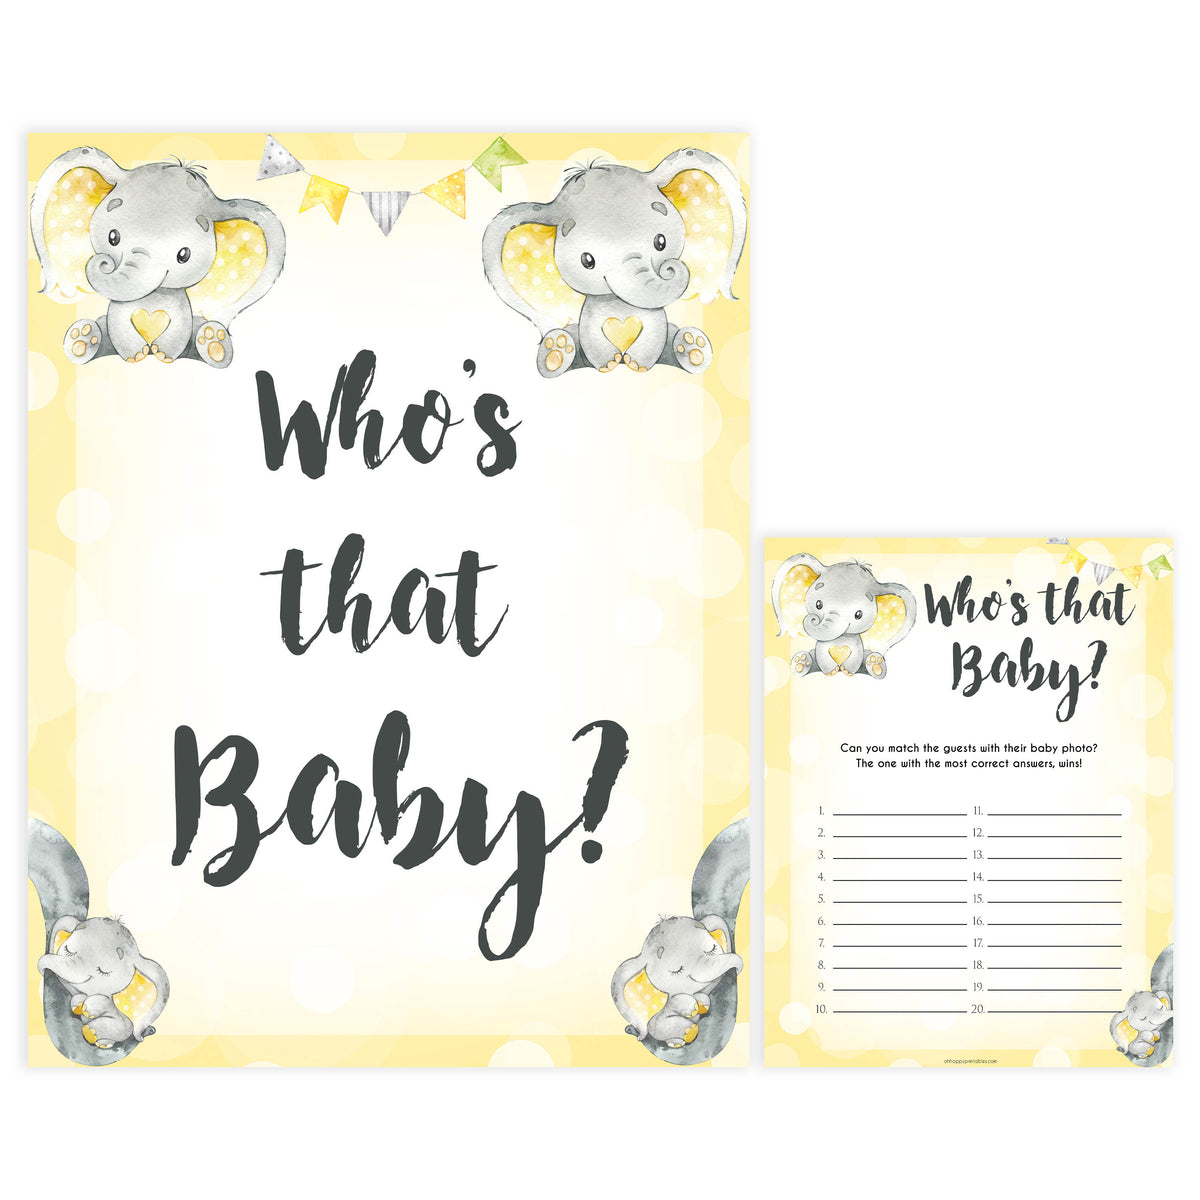 whos that baby game, guess the baby picture game, Printable baby shower games, fun baby games, baby shower games, fun baby shower ideas, top baby shower ideas, yellow elephant baby shower, blue baby shower ideas